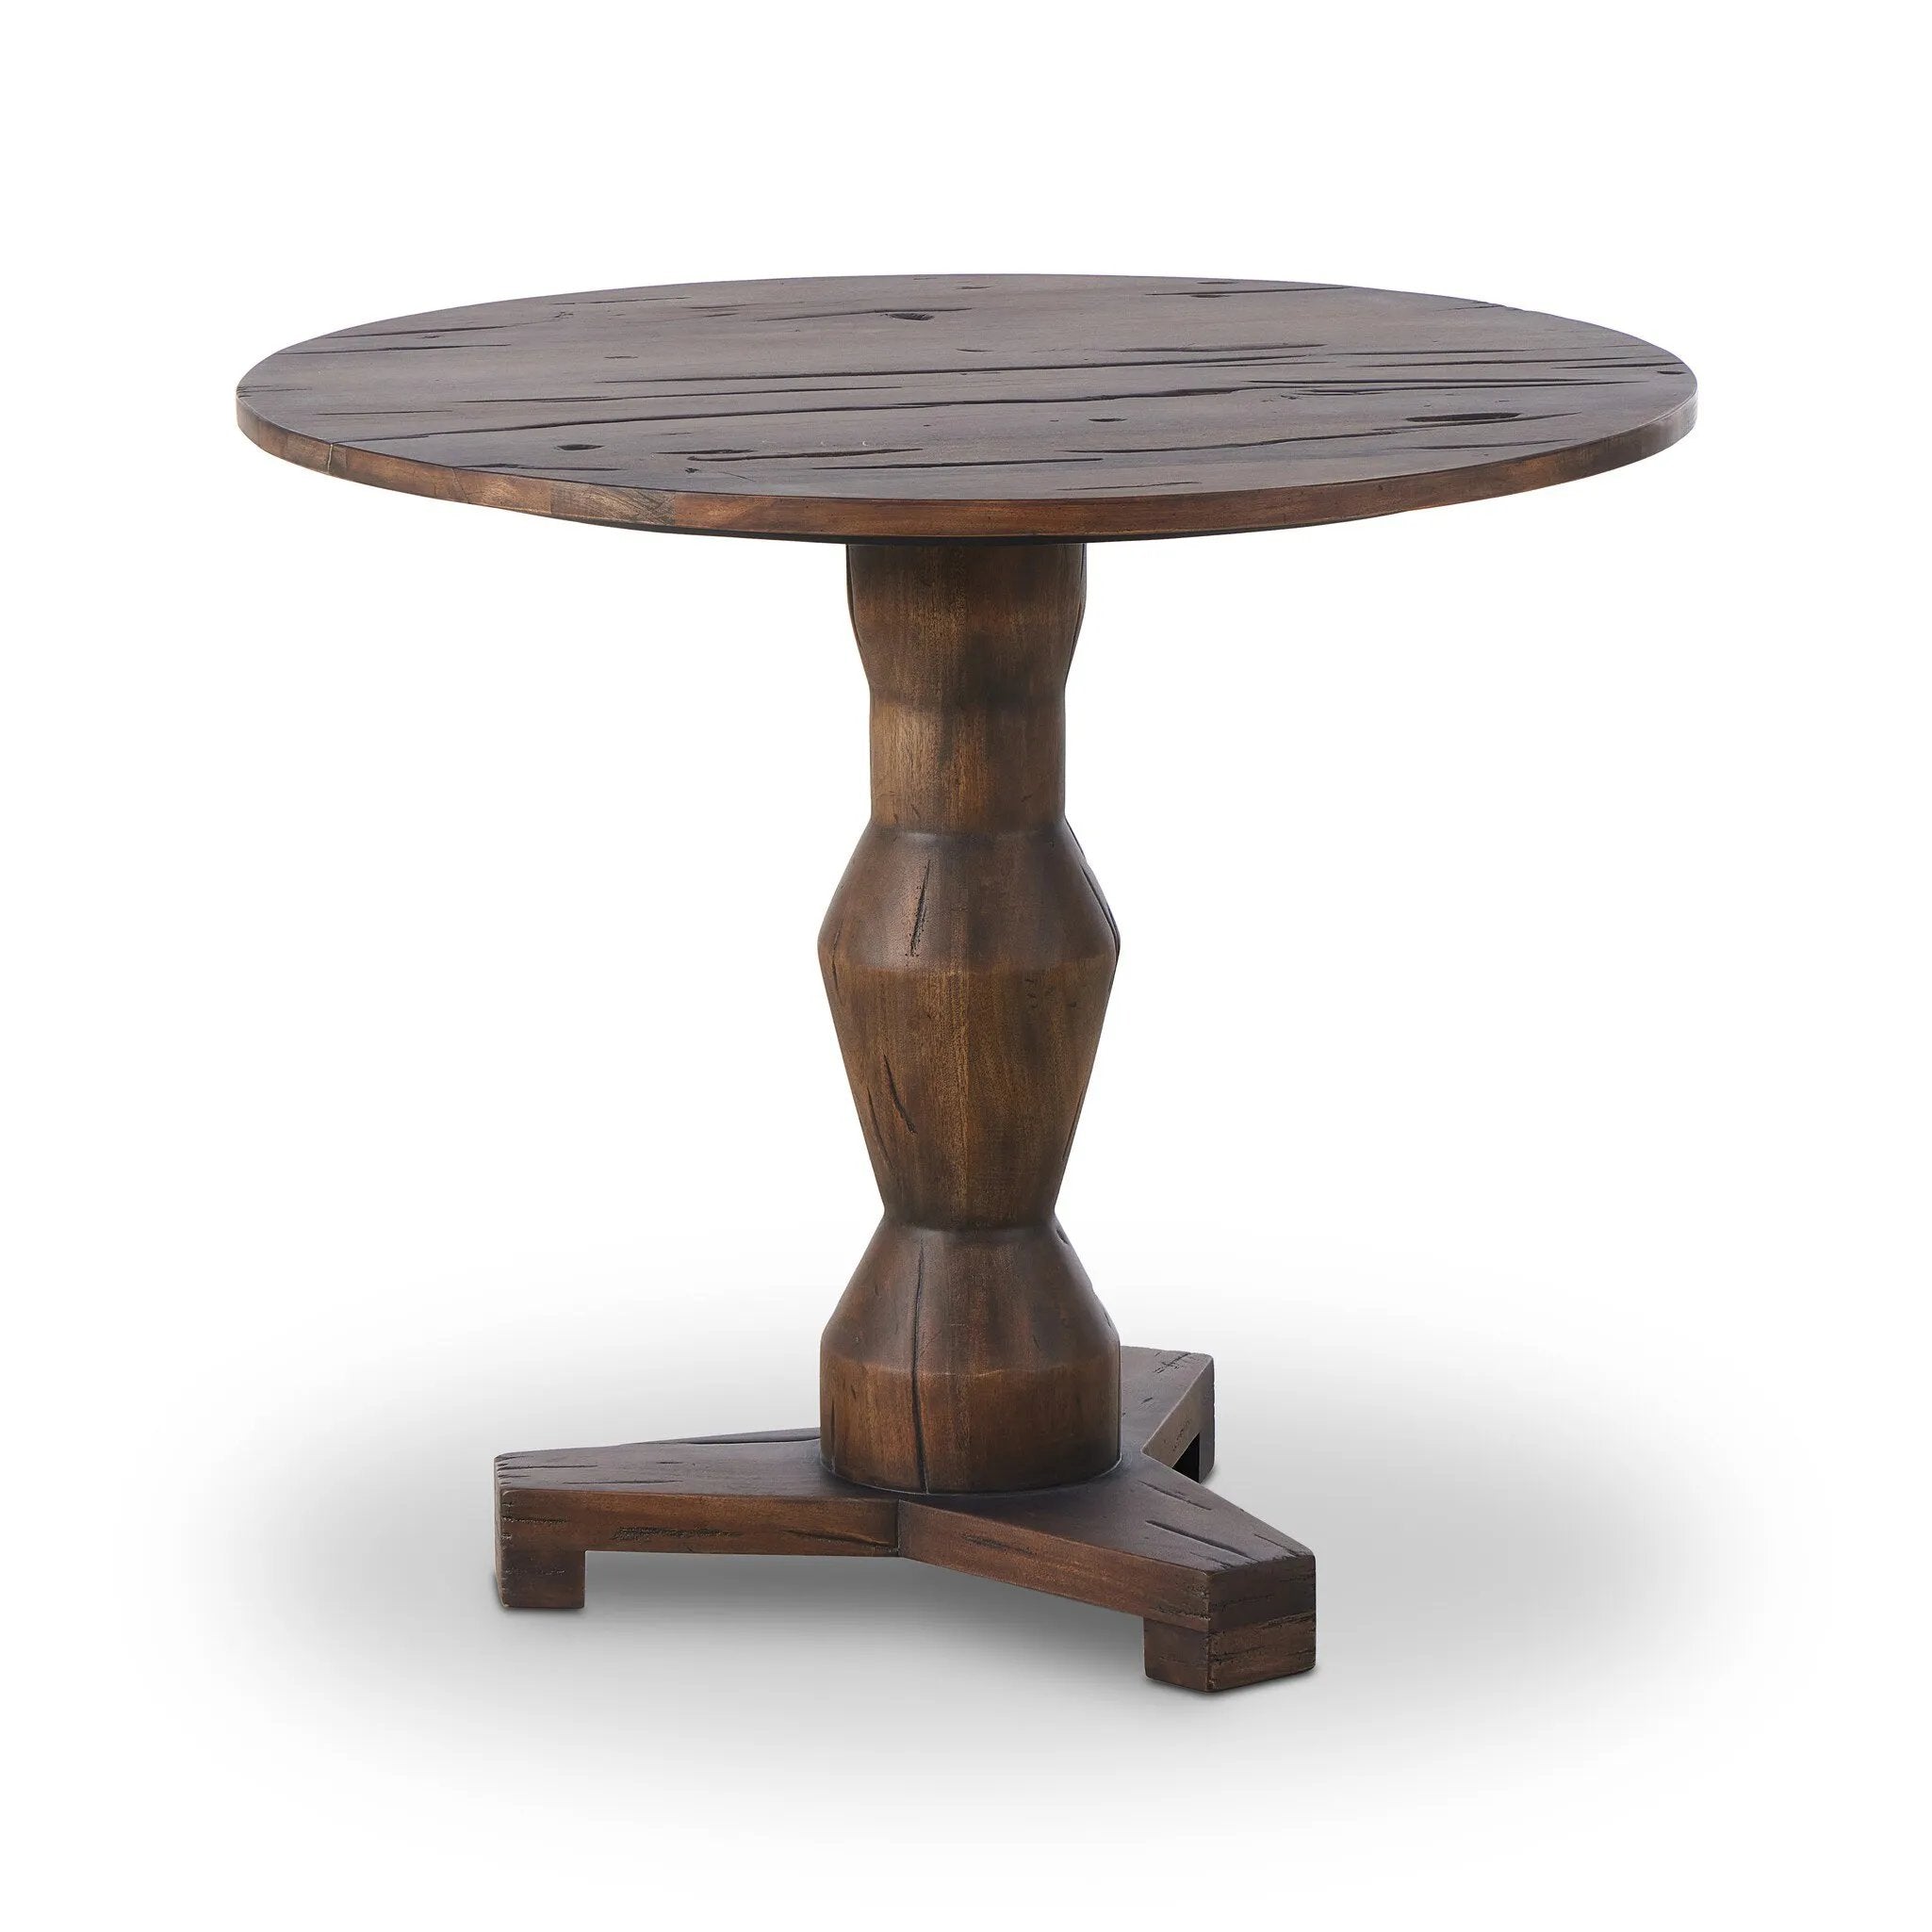 Inspired by Romanian sculptor Constantin BrÃ¢ncu?i, a classic pedestal table of mixed character woods works a heritage look into the home.Collection: Theor Amethyst Home provides interior design, new home construction design consulting, vintage area rugs, and lighting in the Kansas City metro area.